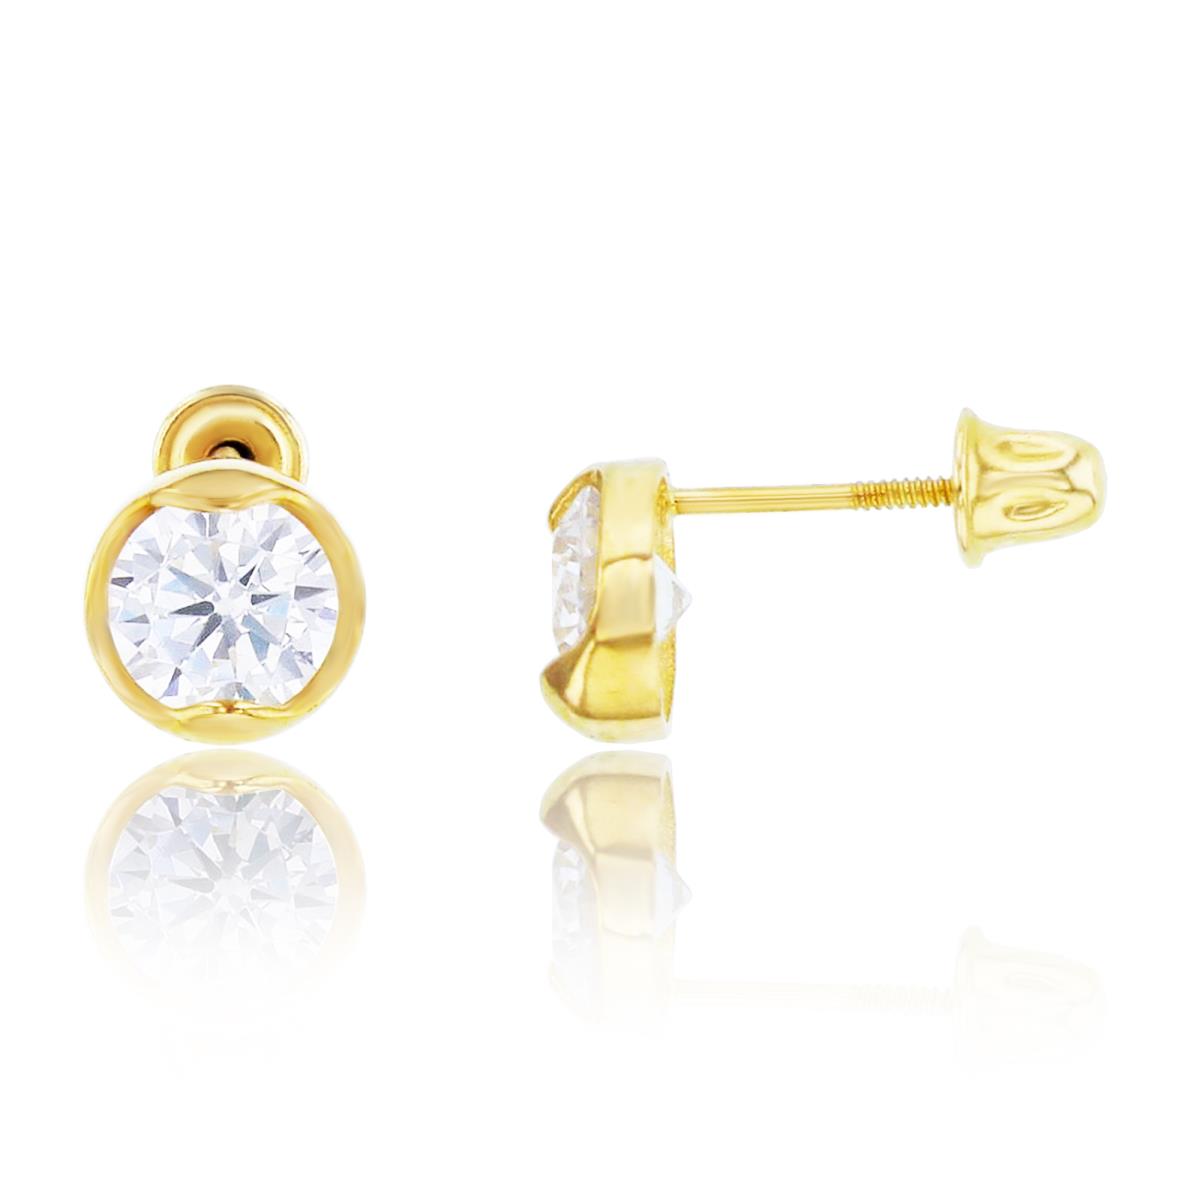 14K Yellow Gold 5mm Round Cut Solitaire Screwback Stud Earring